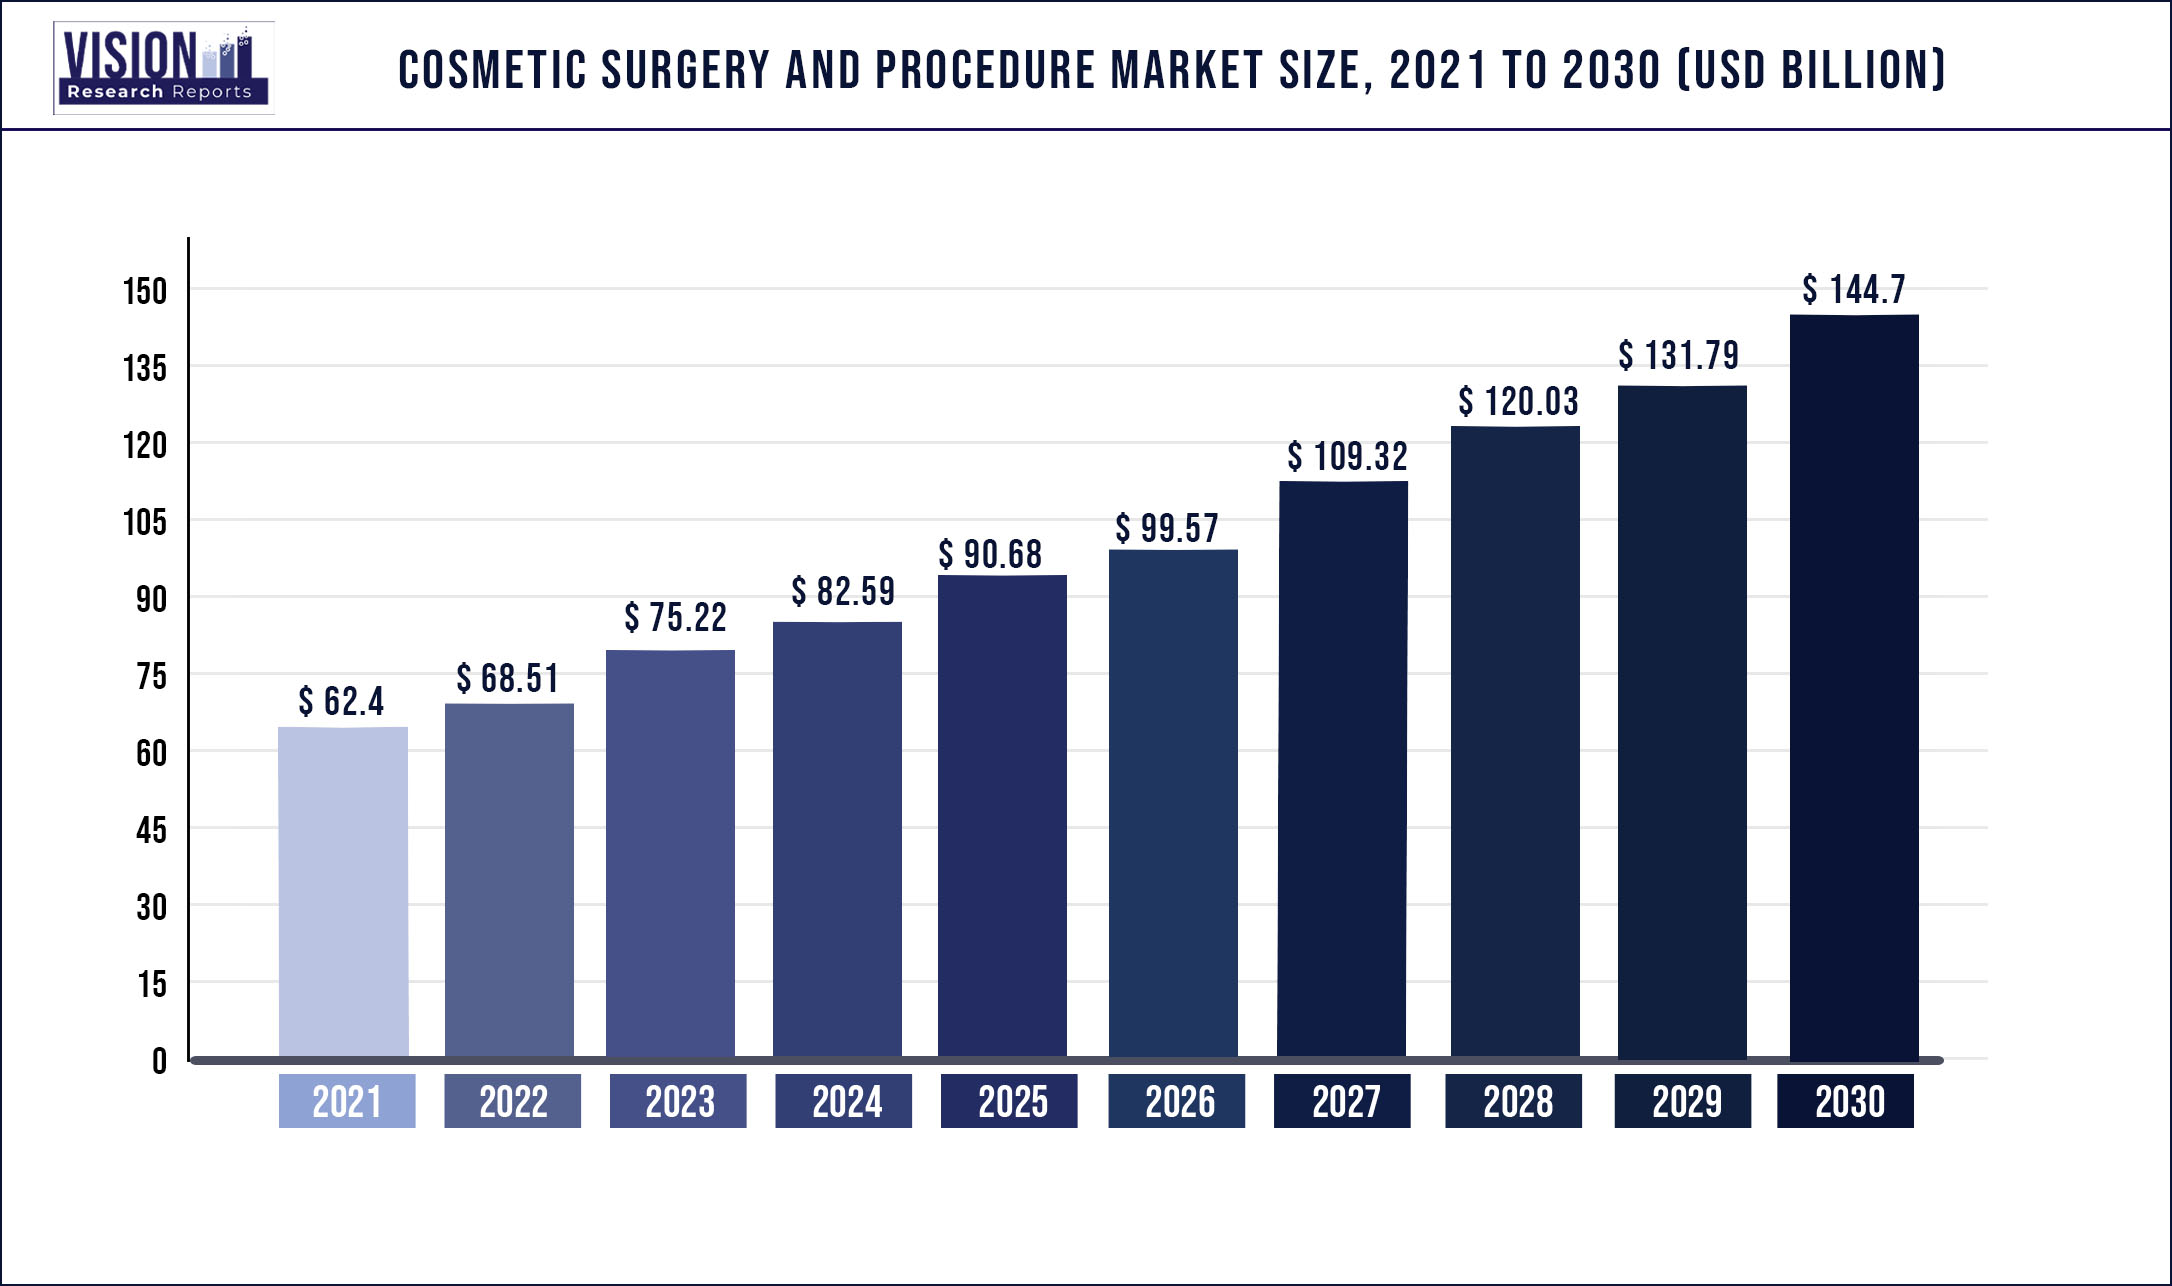 Cosmetic Surgery And Procedure Market Size 2021 to 2030